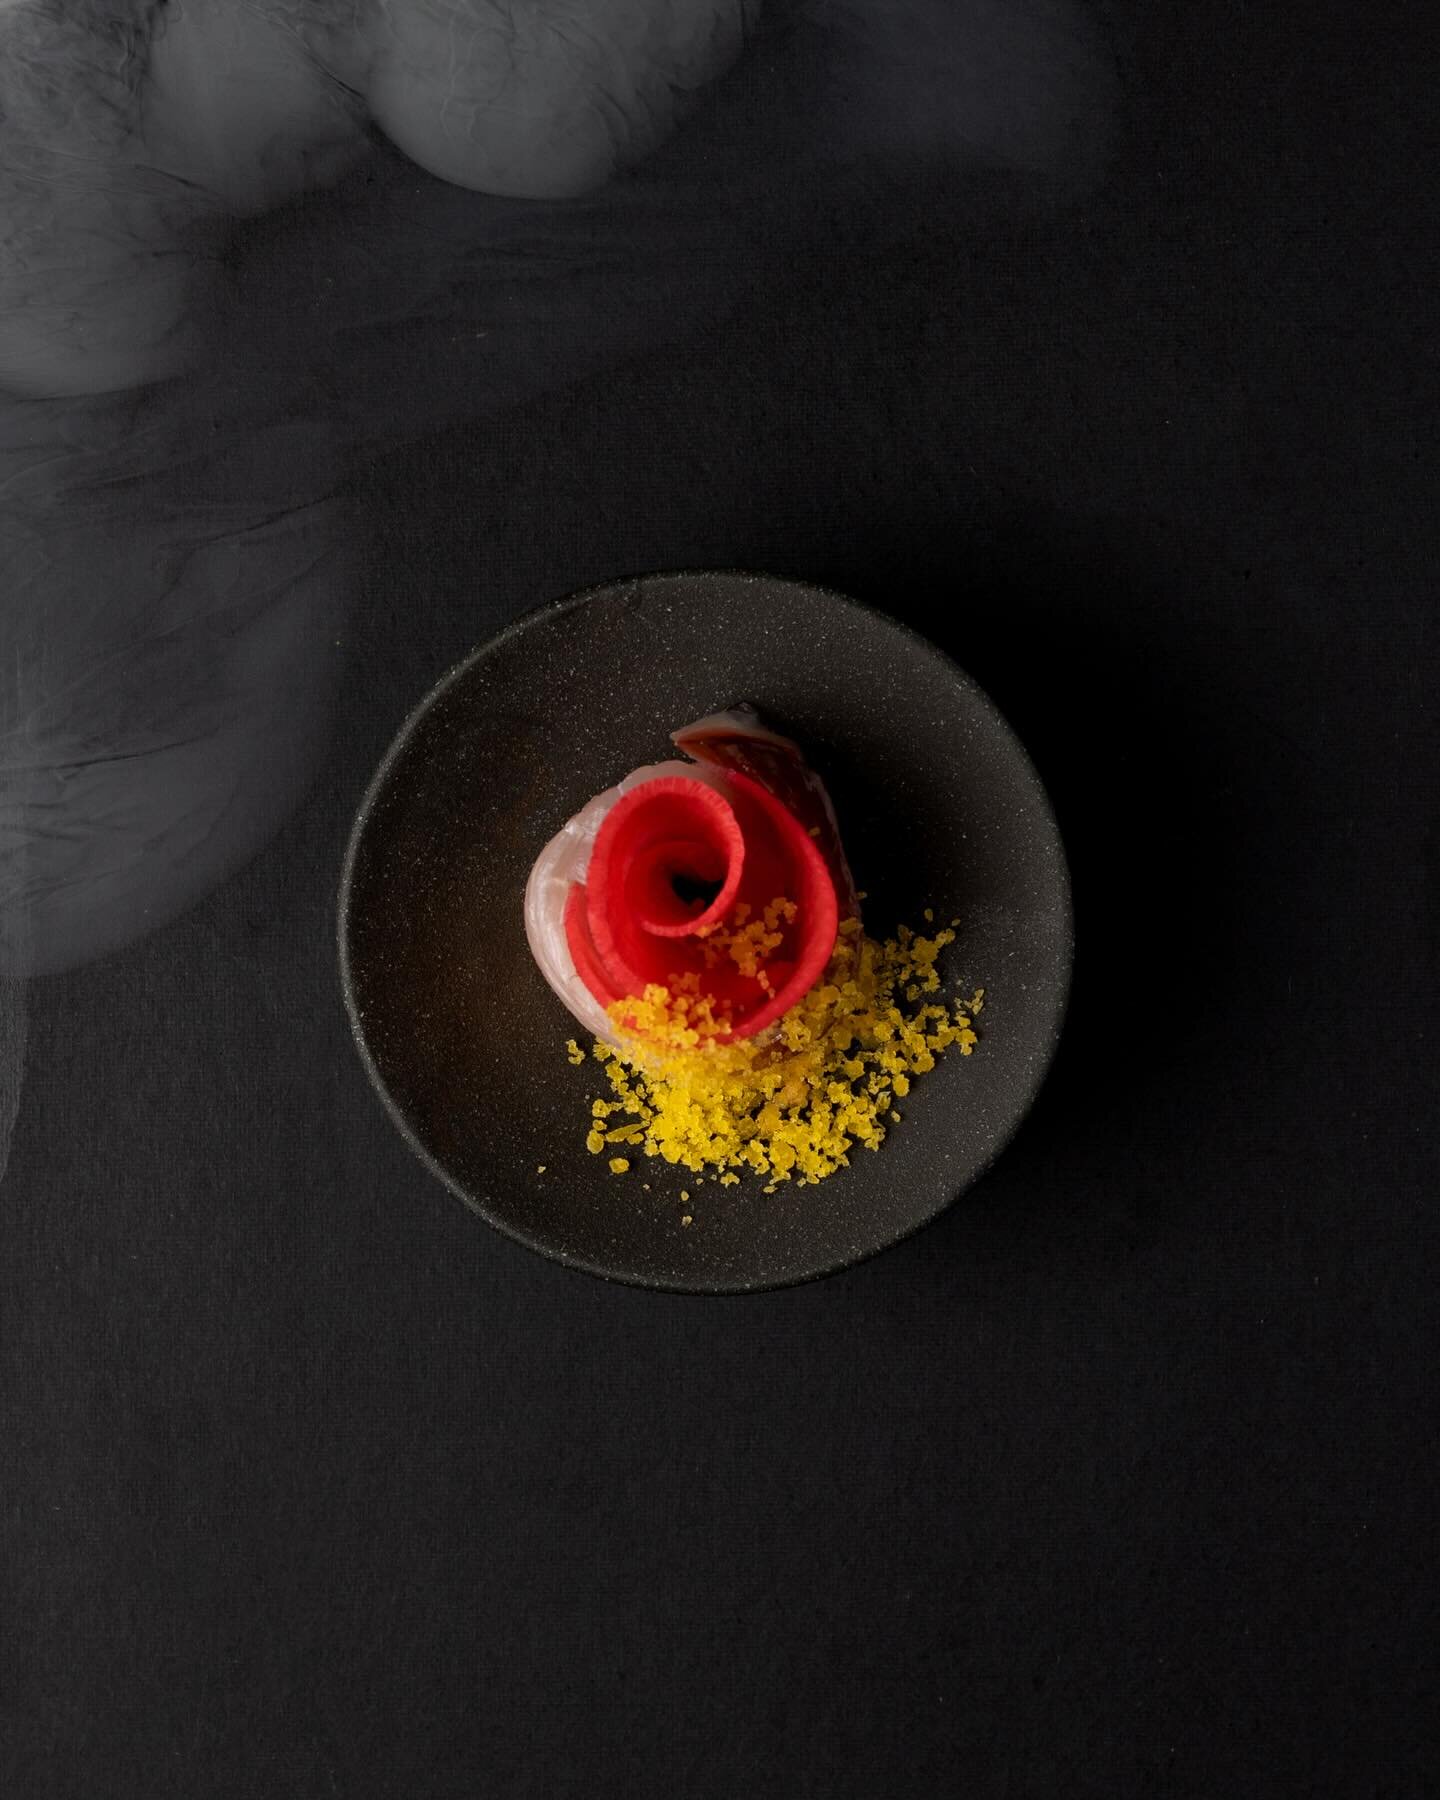 Tonight, love isn&rsquo;t just in the air, but in every flavour and aroma wafting from our kitchen. Happy Valentine&rsquo;s Day from team Tetsu ❤️❤️

#japanesefood #japanesecusine #valentinesdaydinner #chefofinstagram #chefsdinner #valentines